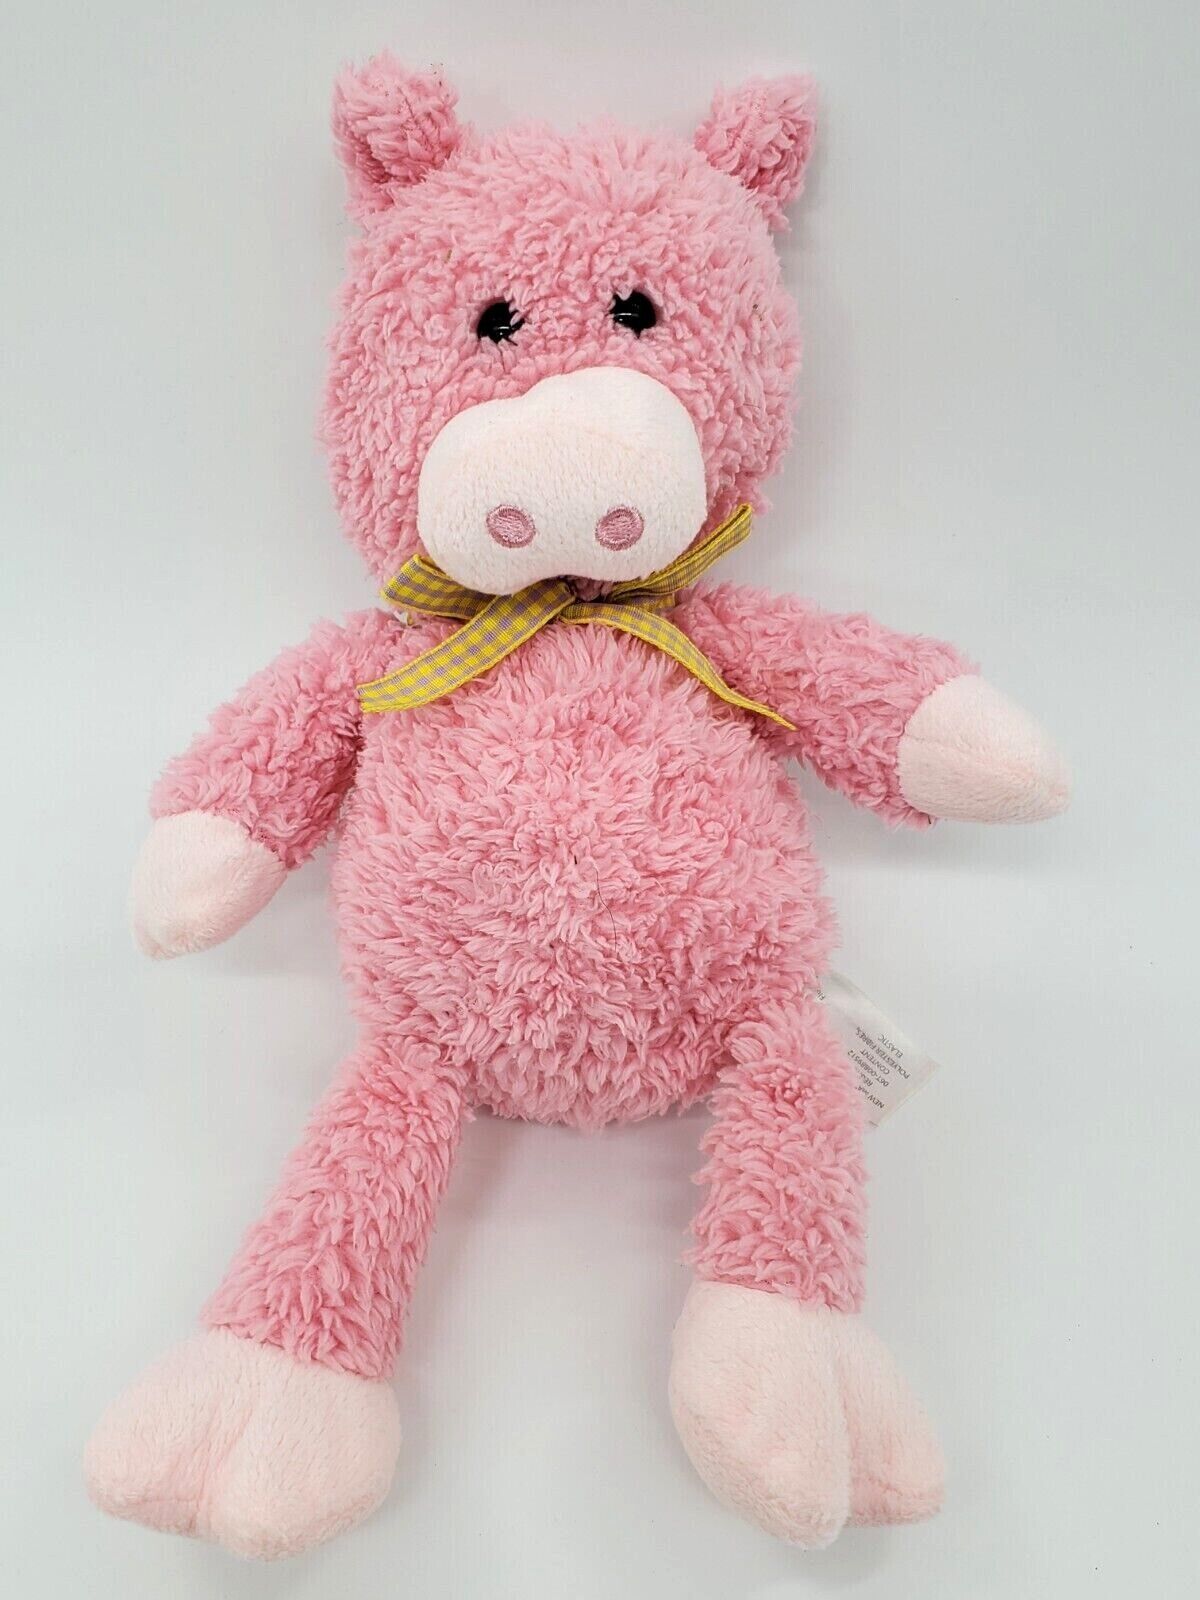 11" Animal Adventure Pink Pig Sweet Sprouts Plush Gingham Bow Stuffed Toy B350 - $12.99